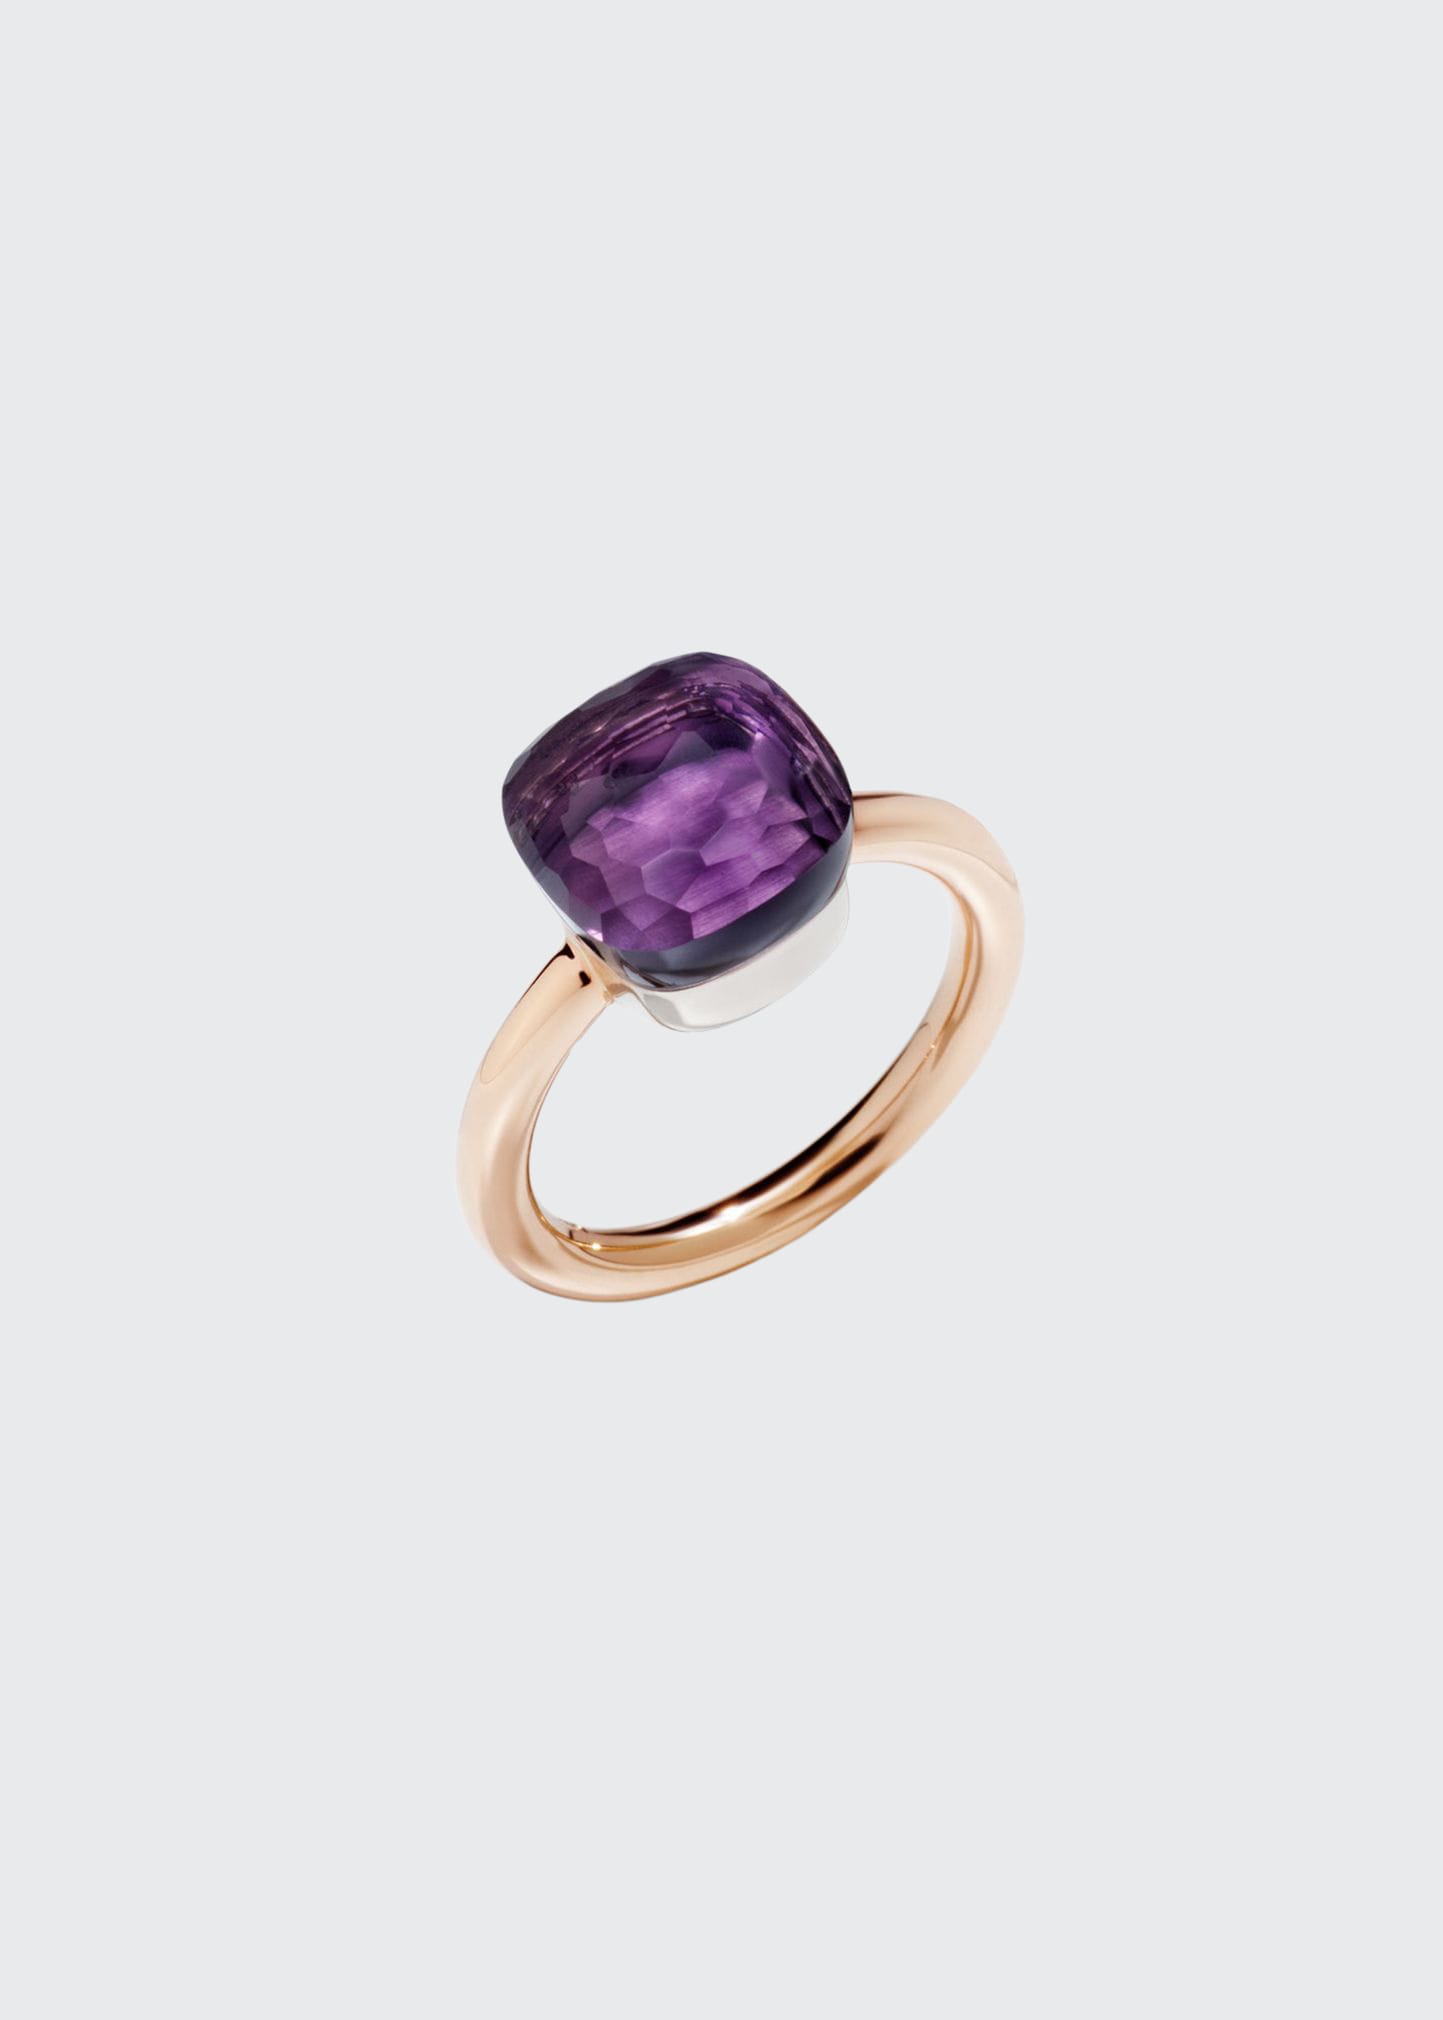 Nudo Classic 18k Gold Amethyst Ring, Size 55